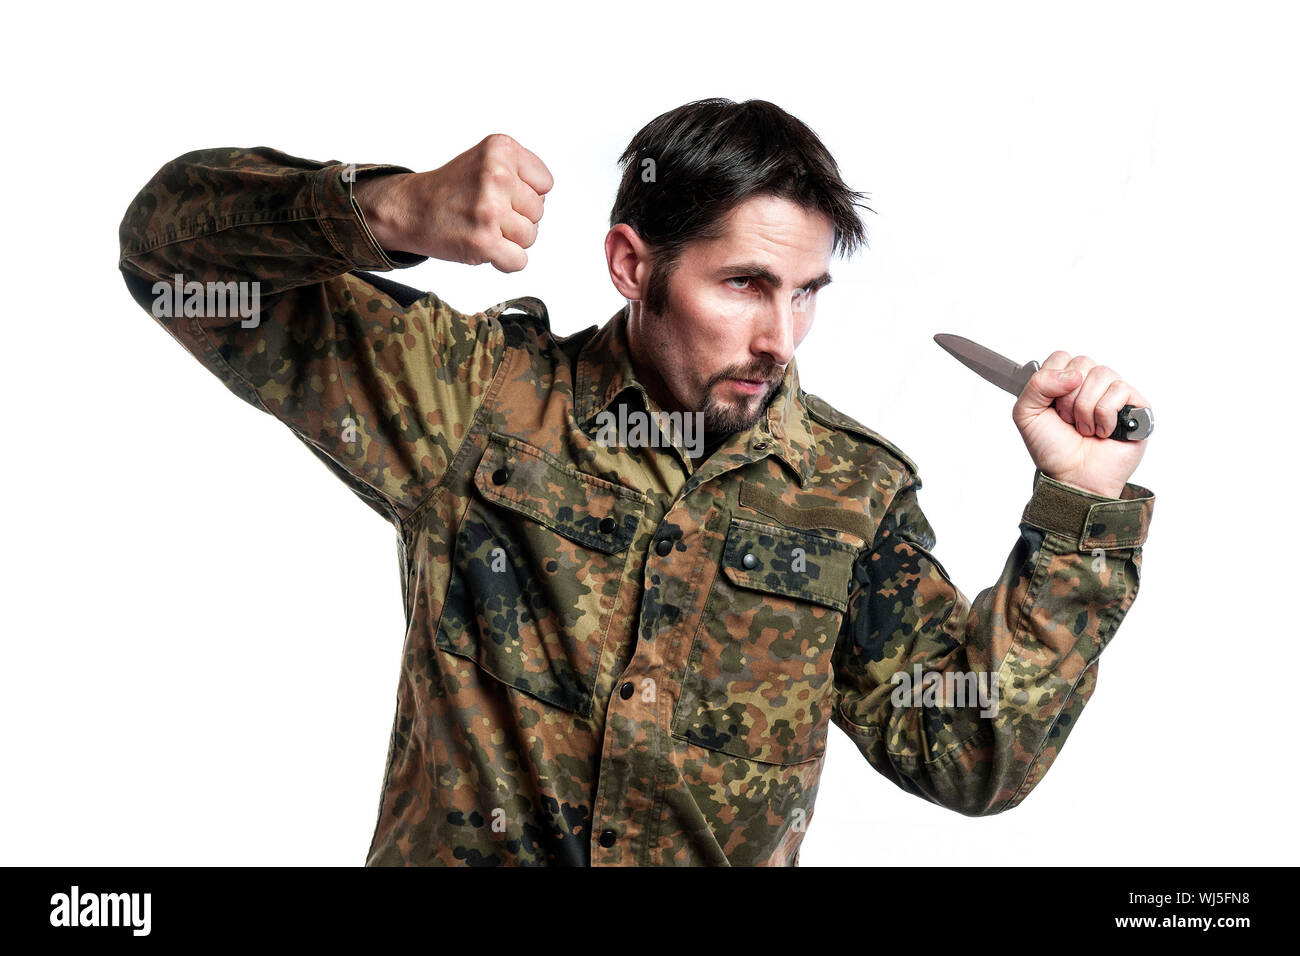 Male self defense instructor with camouflage do a self defense exercise with knife, isolated on white background Stock Photo